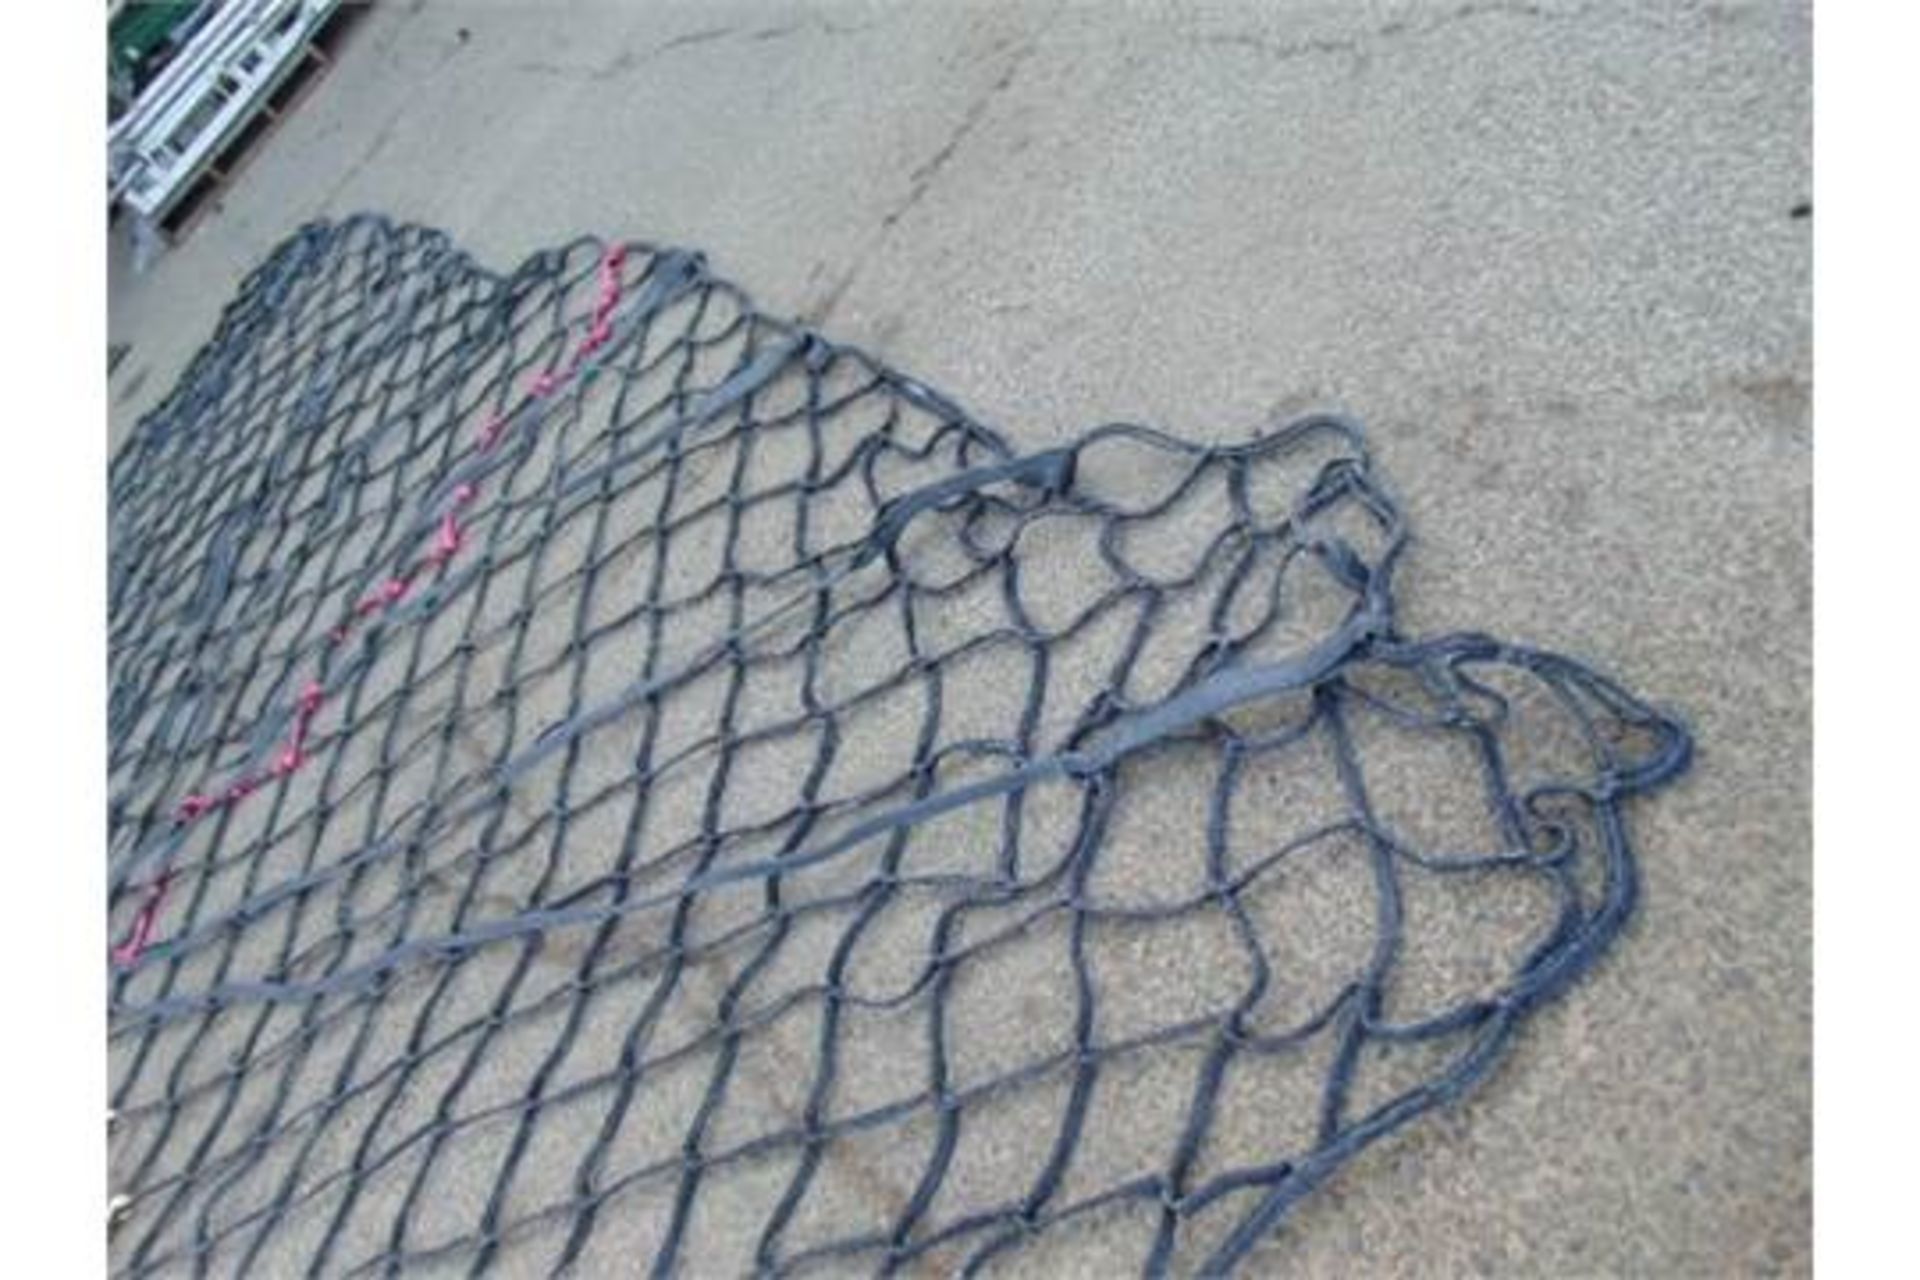 5600Kg Helicopter Cargo Net - Image 7 of 9